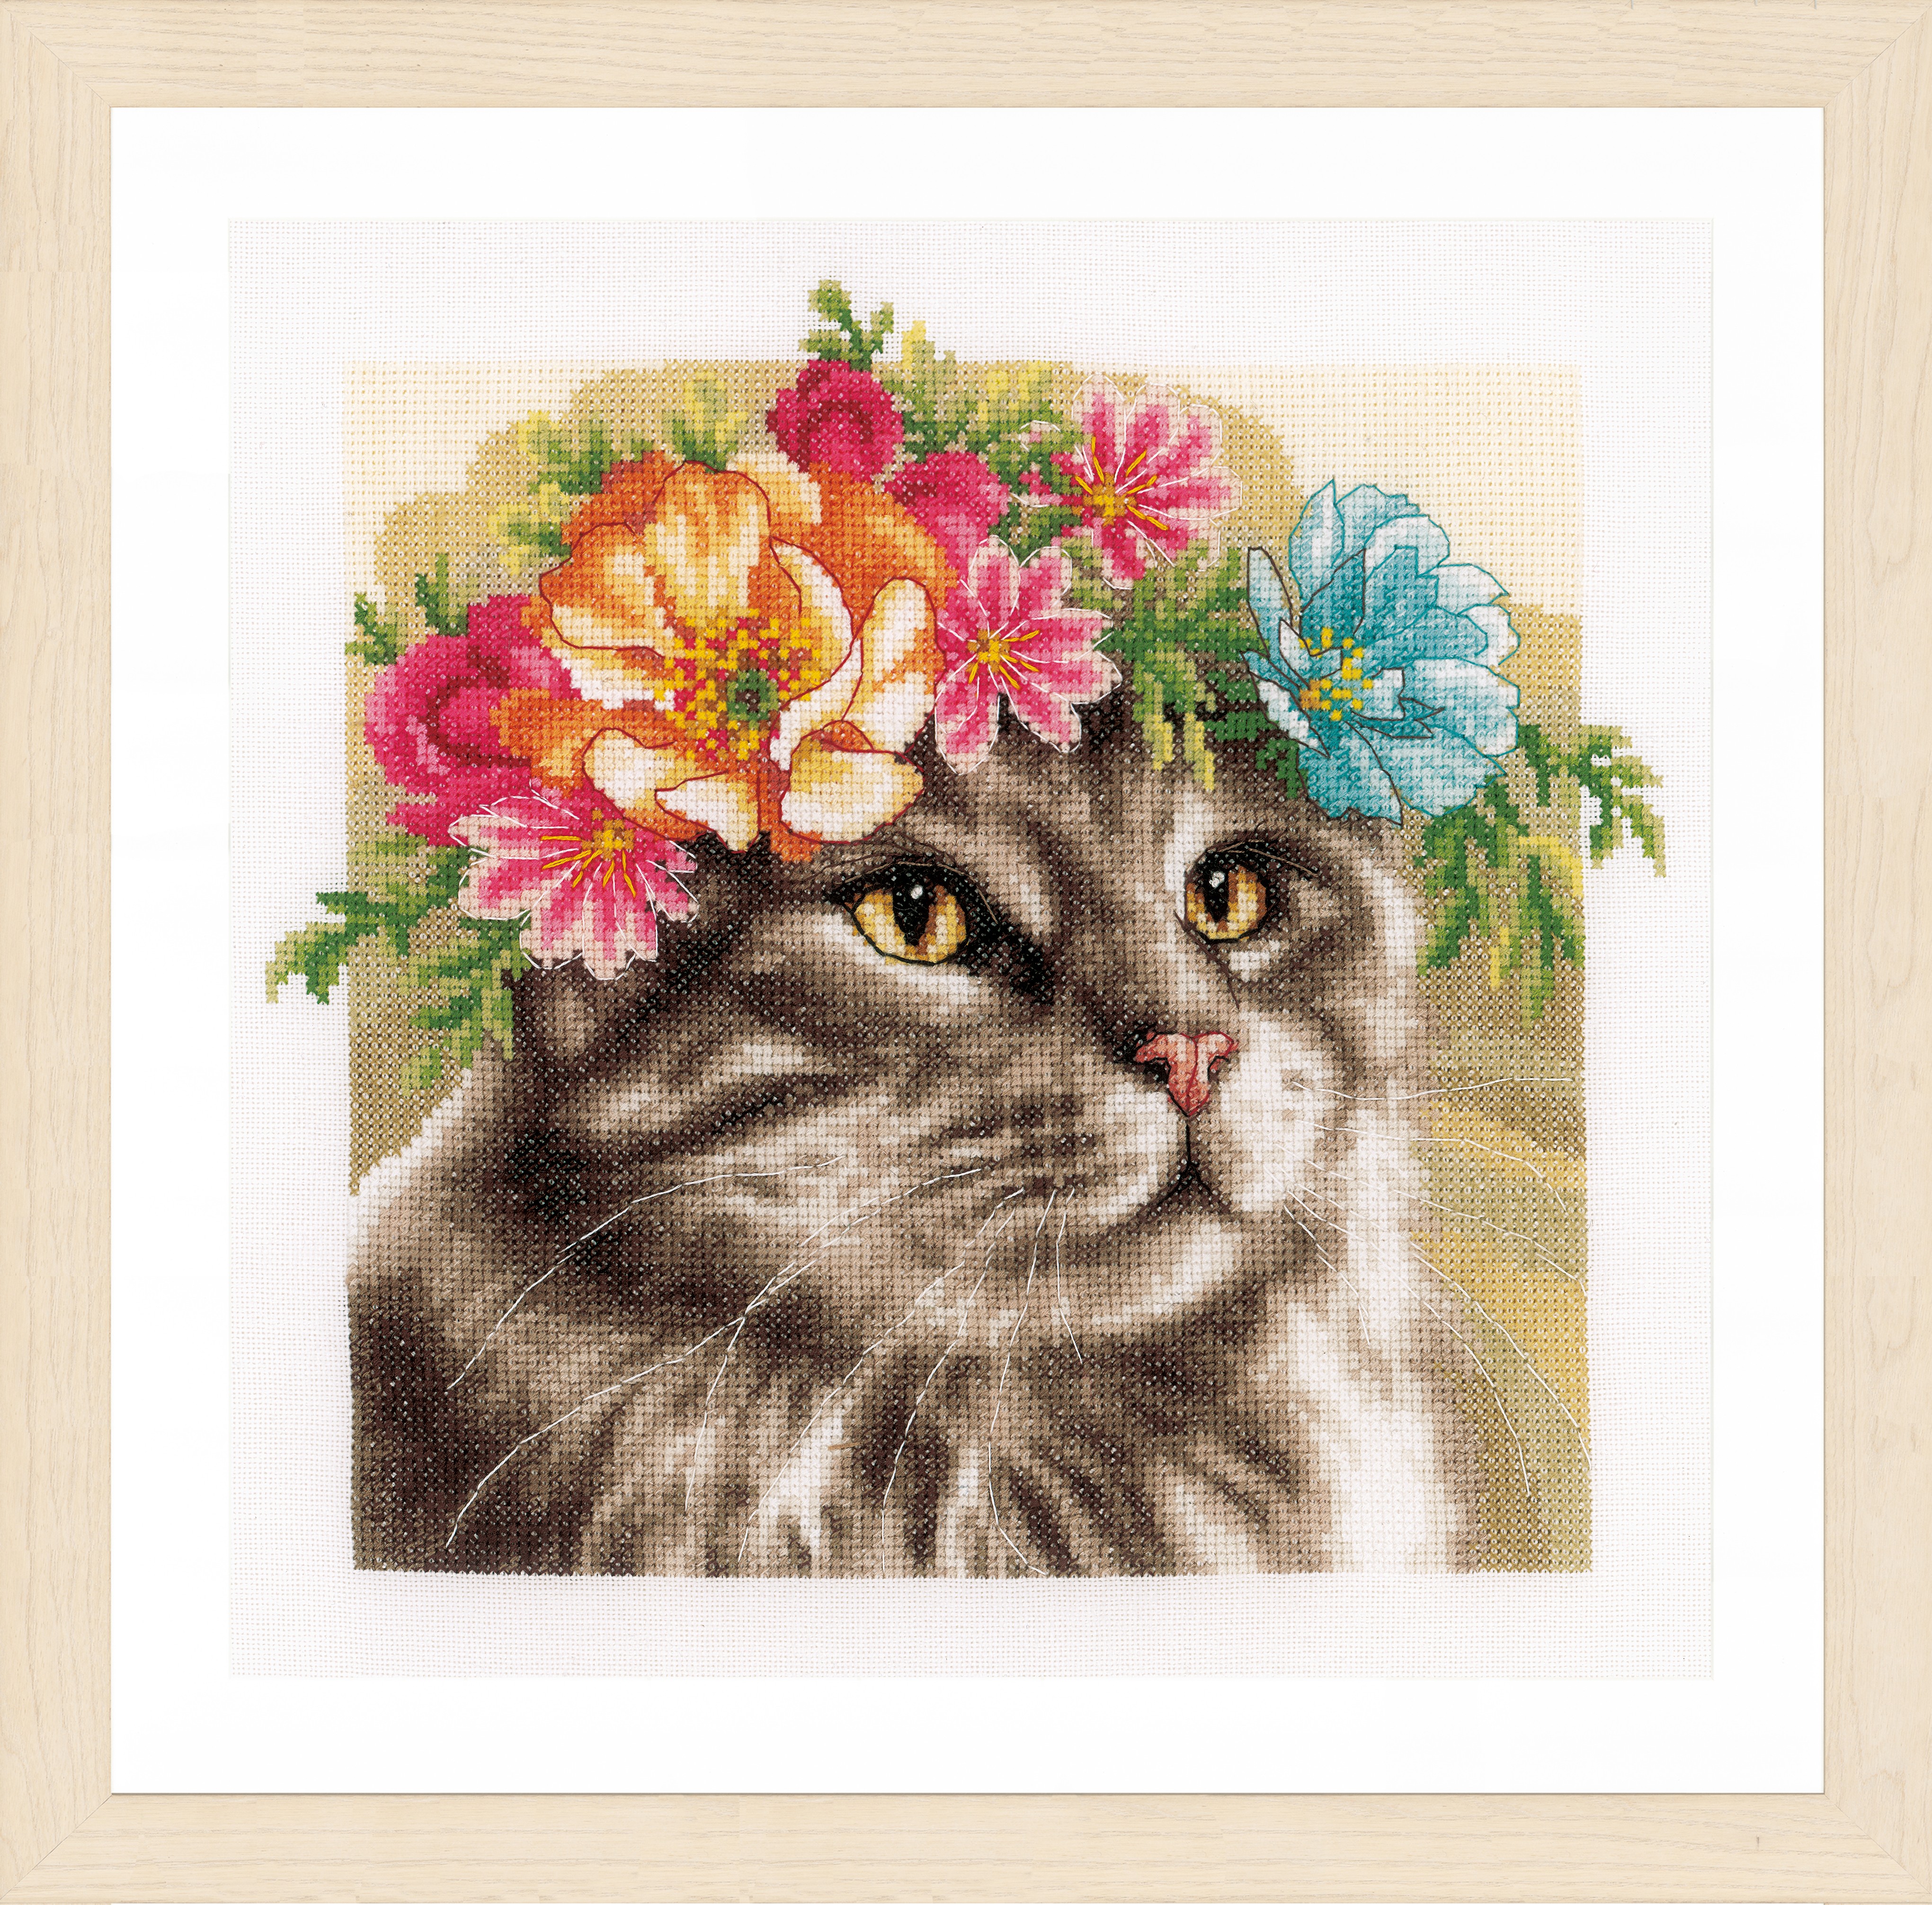 Lanarte Counted Cross Stitch Kit - Flower Crown: Maine Coon